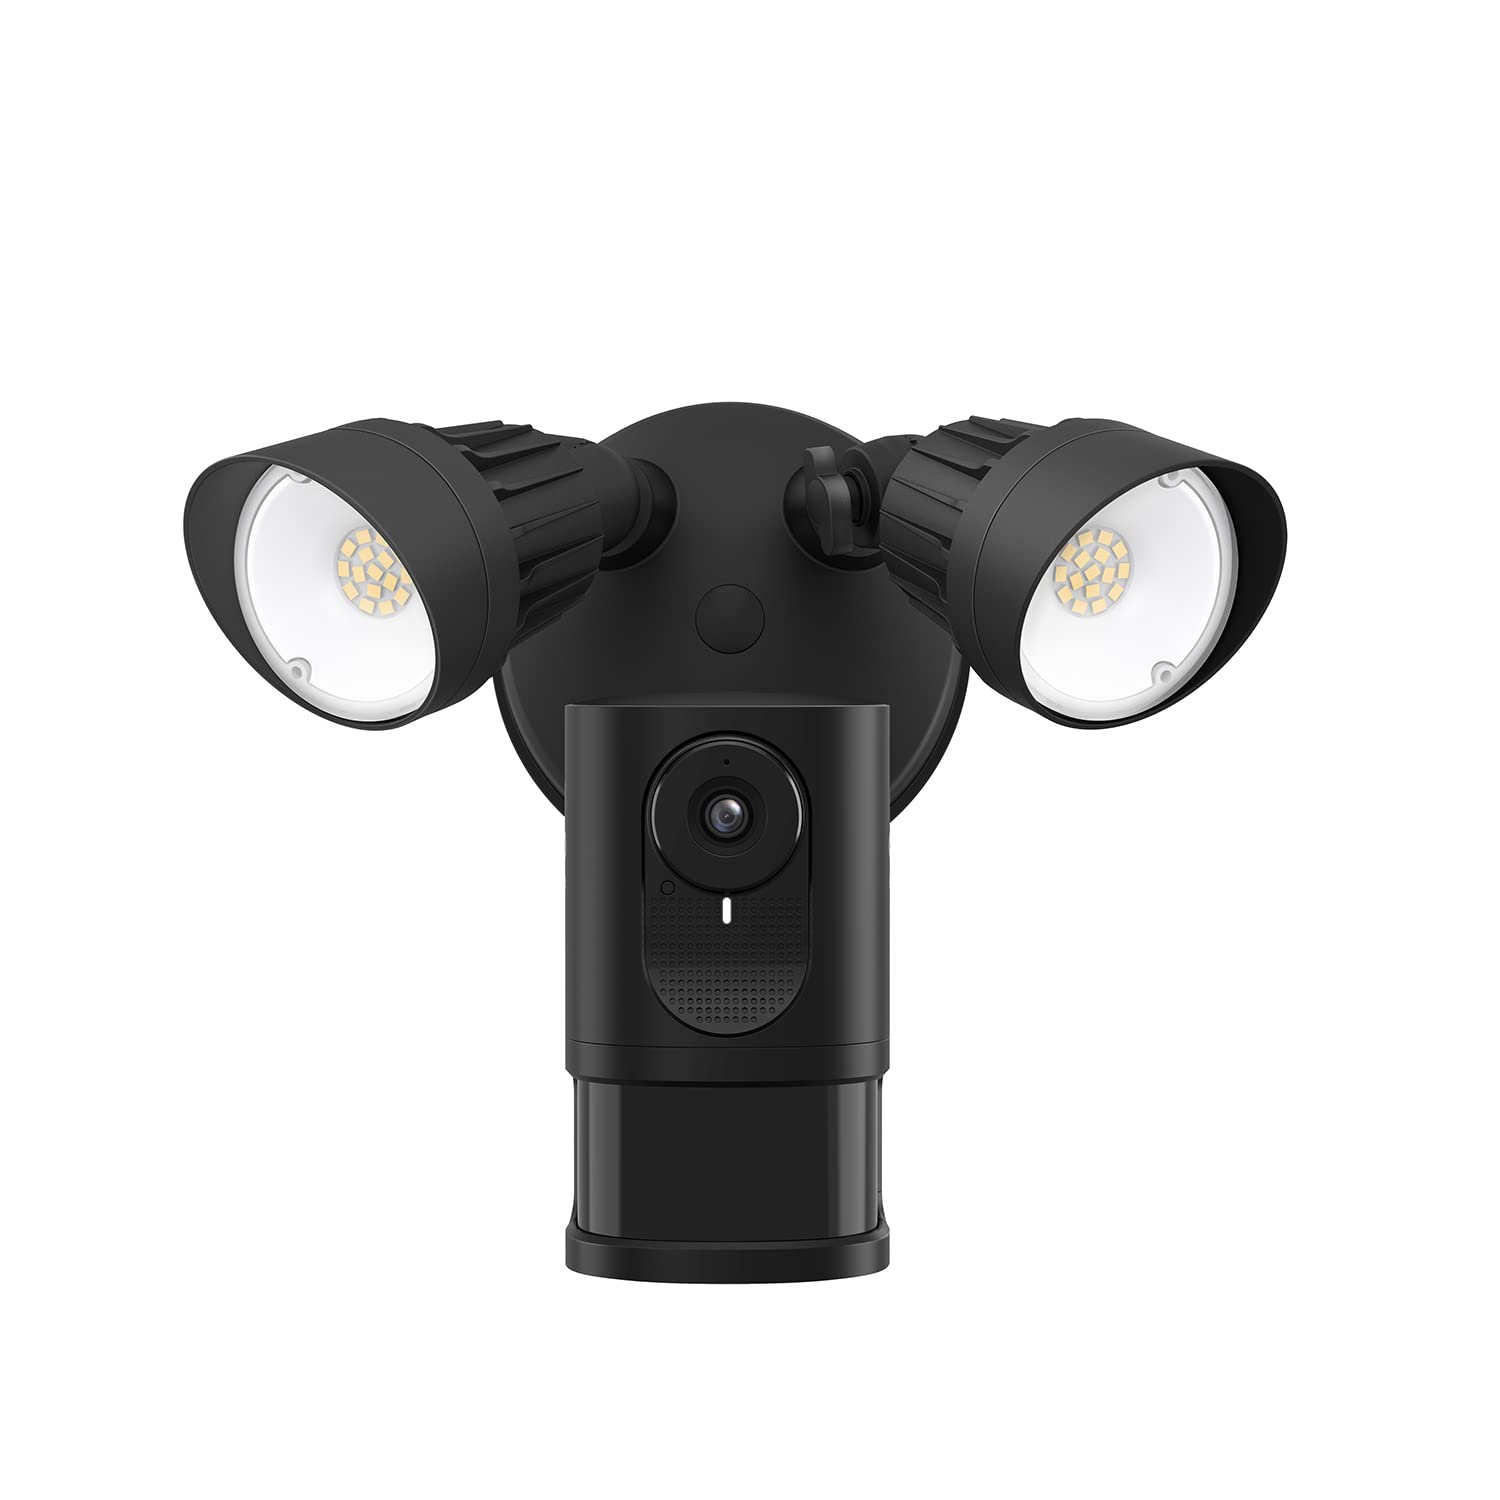 eufy Security Floodlight Cam E220 with Built-in AI, 2K, 2-Way Audio, No Monthly Fees, 2000-Lumen Brightness, Weatherproof, Motion Only Alert